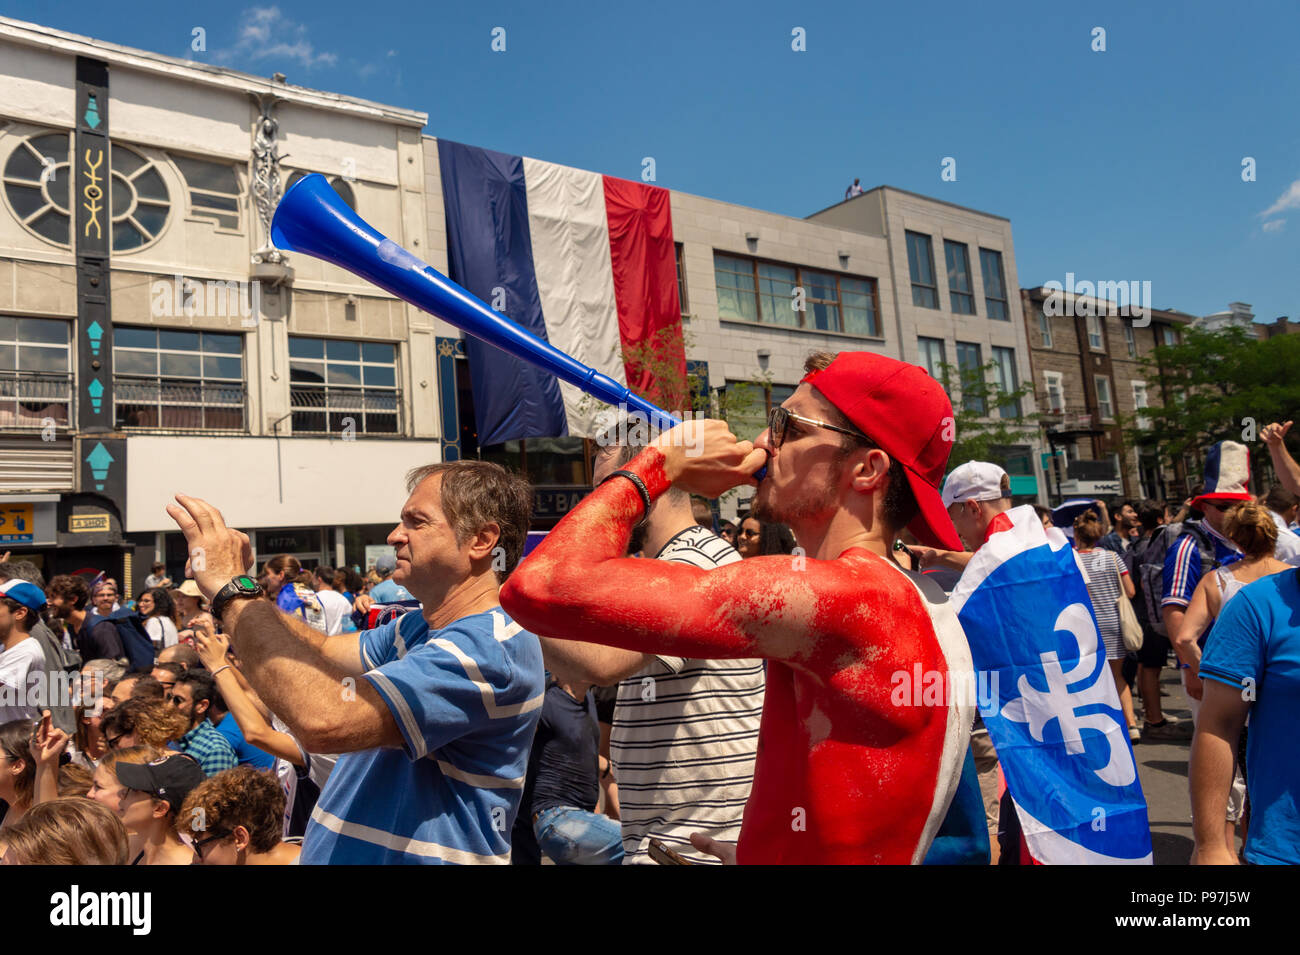 Montreal, Canada. 15th July 2018: French nationals celebrate the victory of the French soccer team during 2018 world cup. Credit: Marc Bruxelle/Alamy Live News Stock Photo